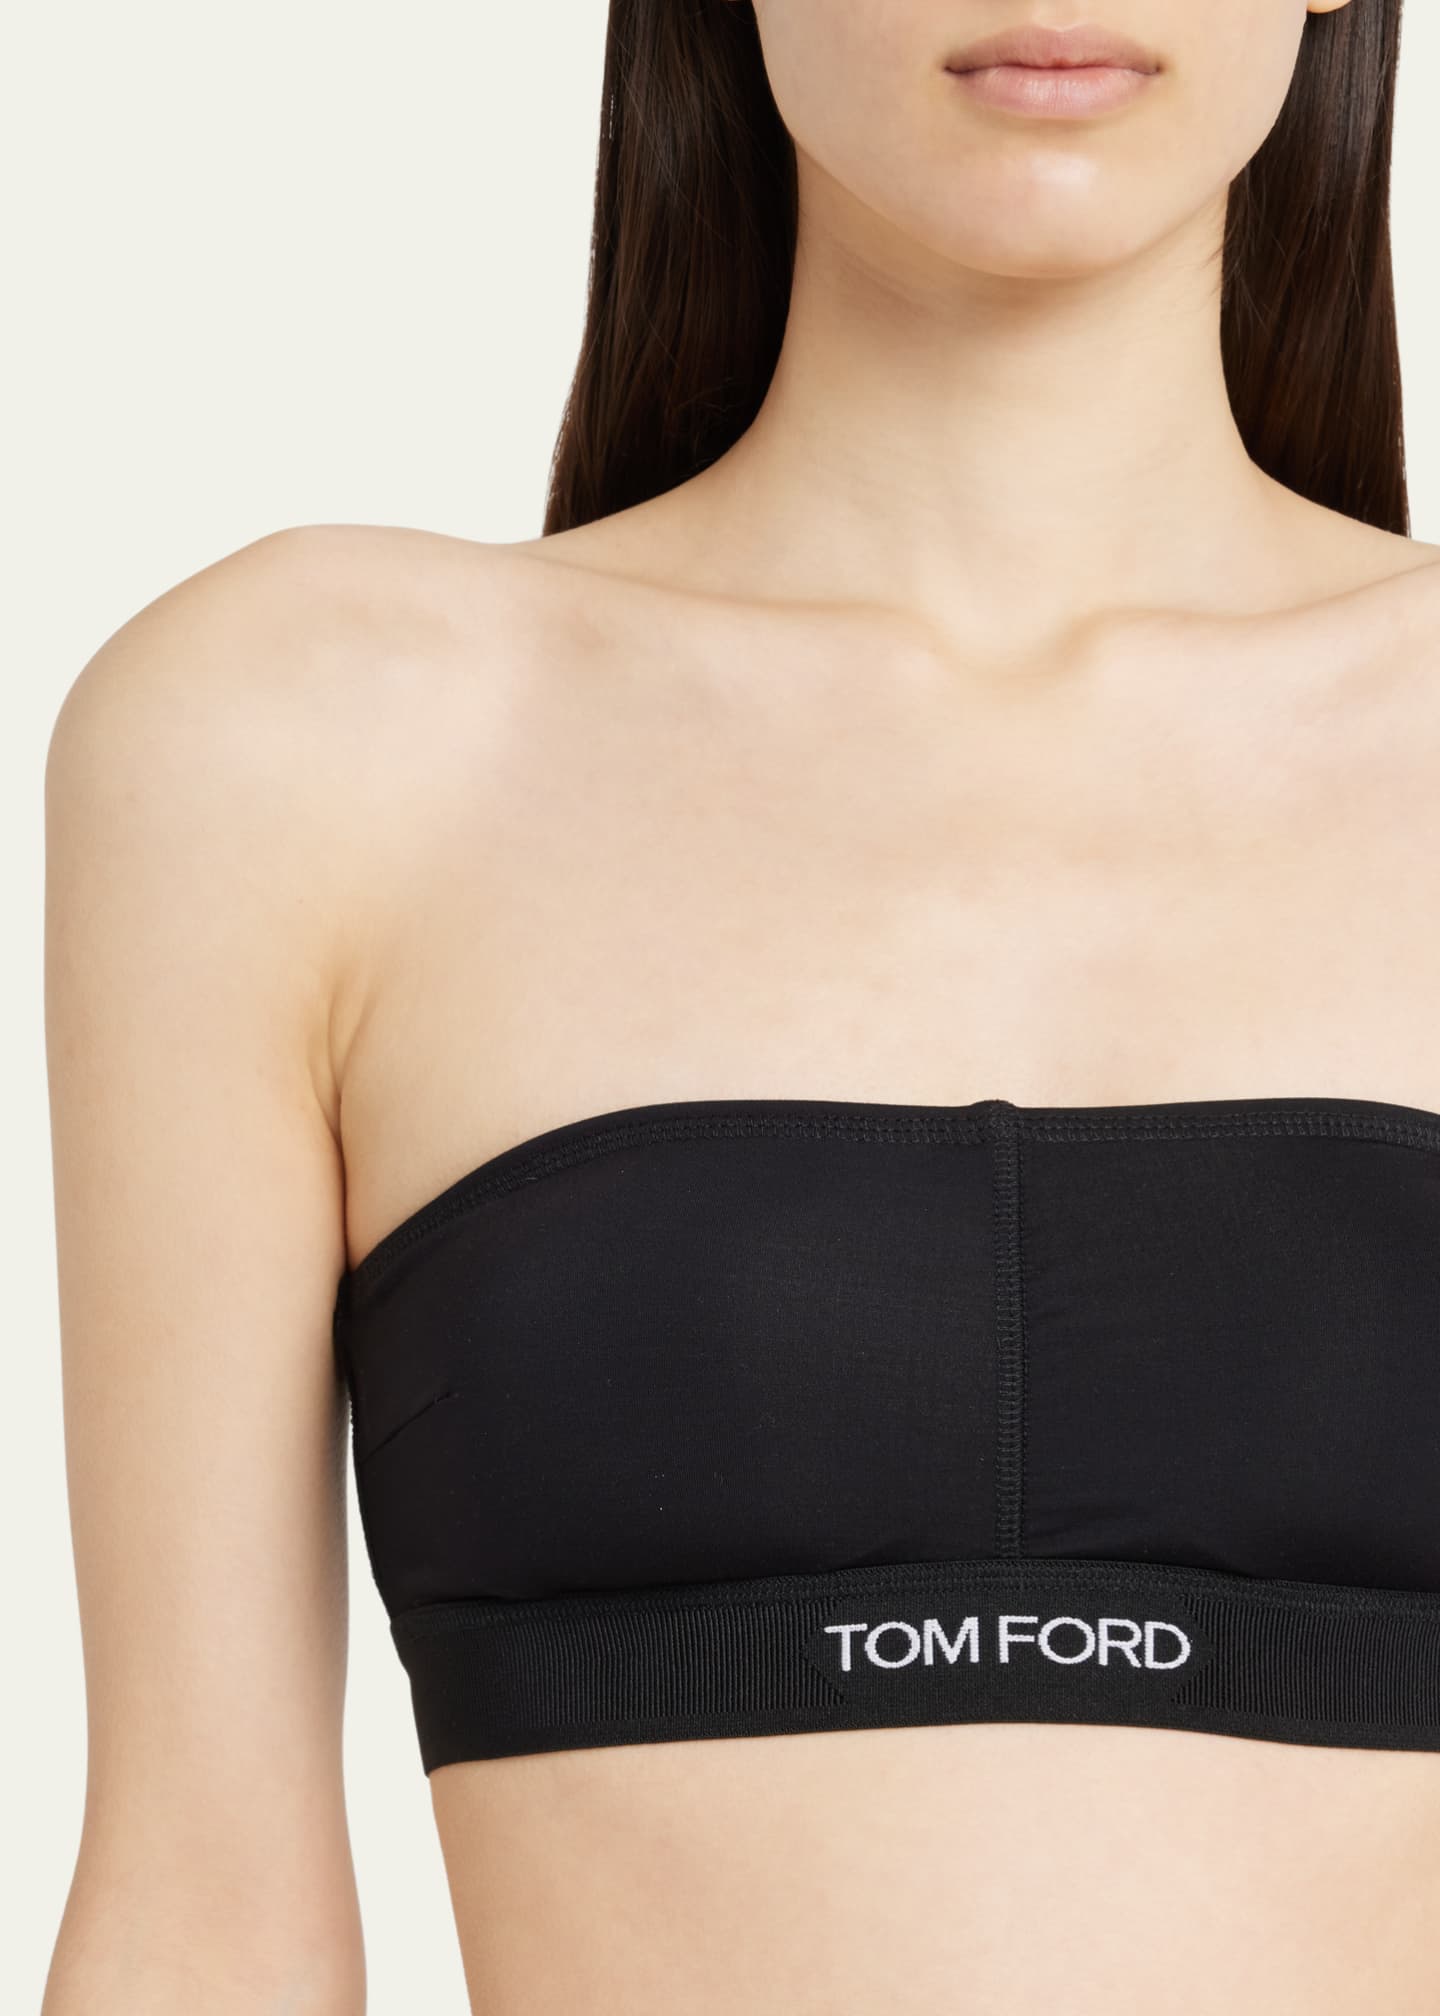 Ford Graphic Tube Top